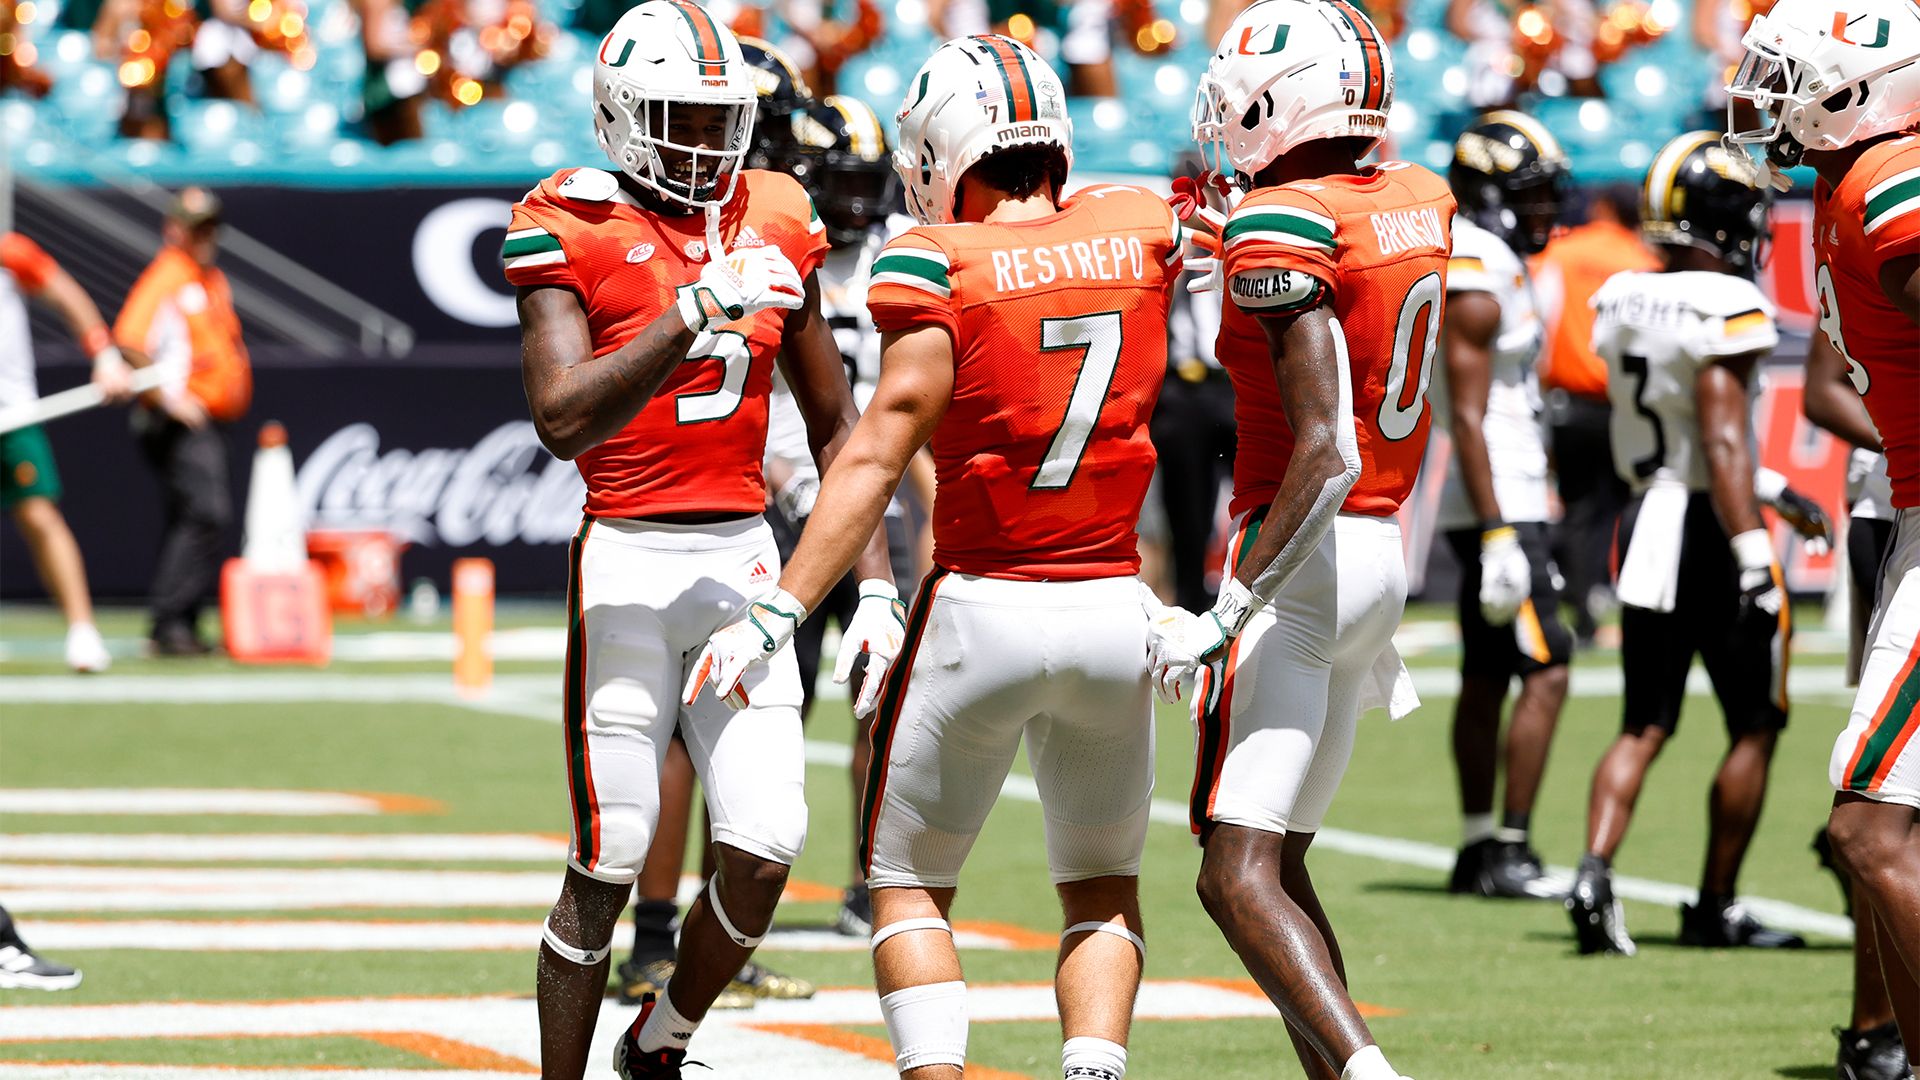 Takeaways from Miami's Win over Southern Miss